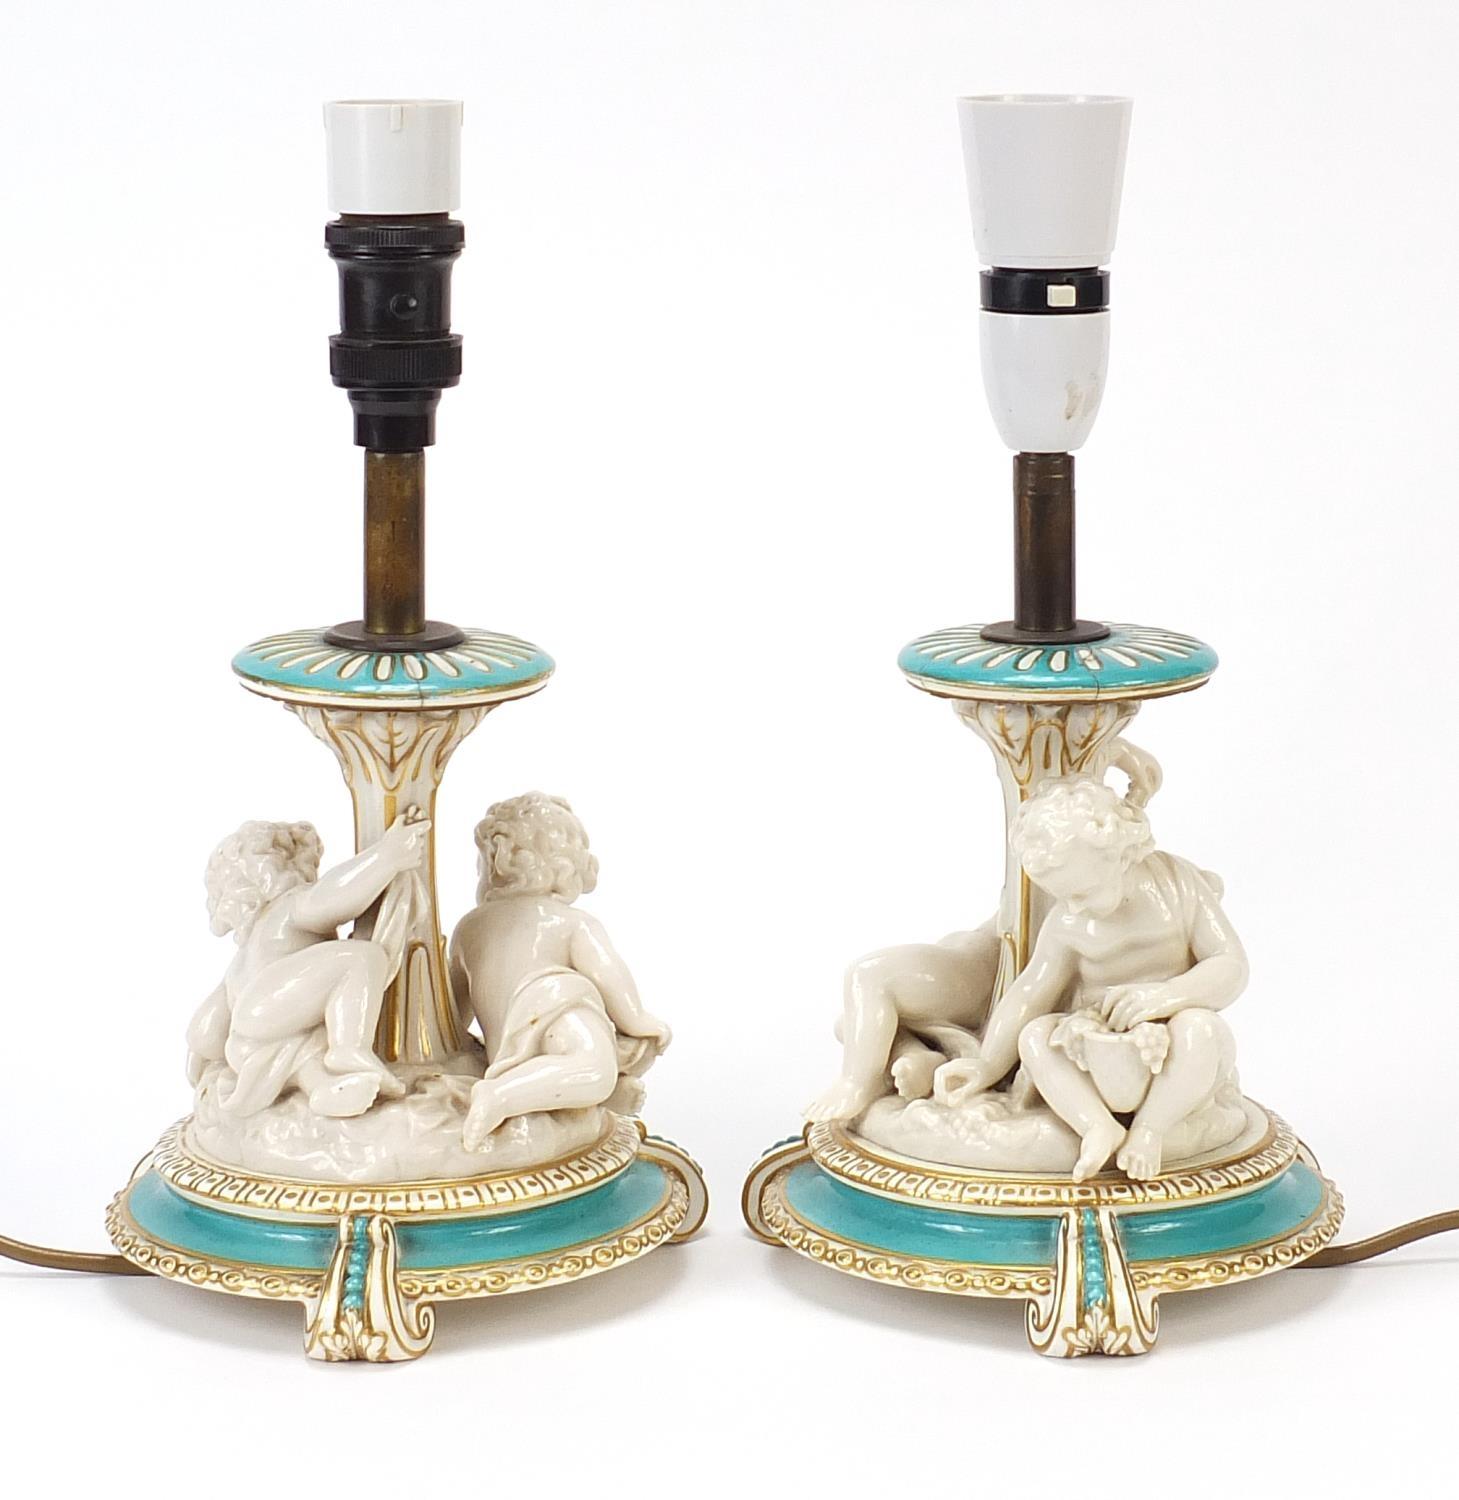 Pair of 19th century turquoise ground porcelain Putti design table lamps, each overall 30.5cm high - Image 2 of 3